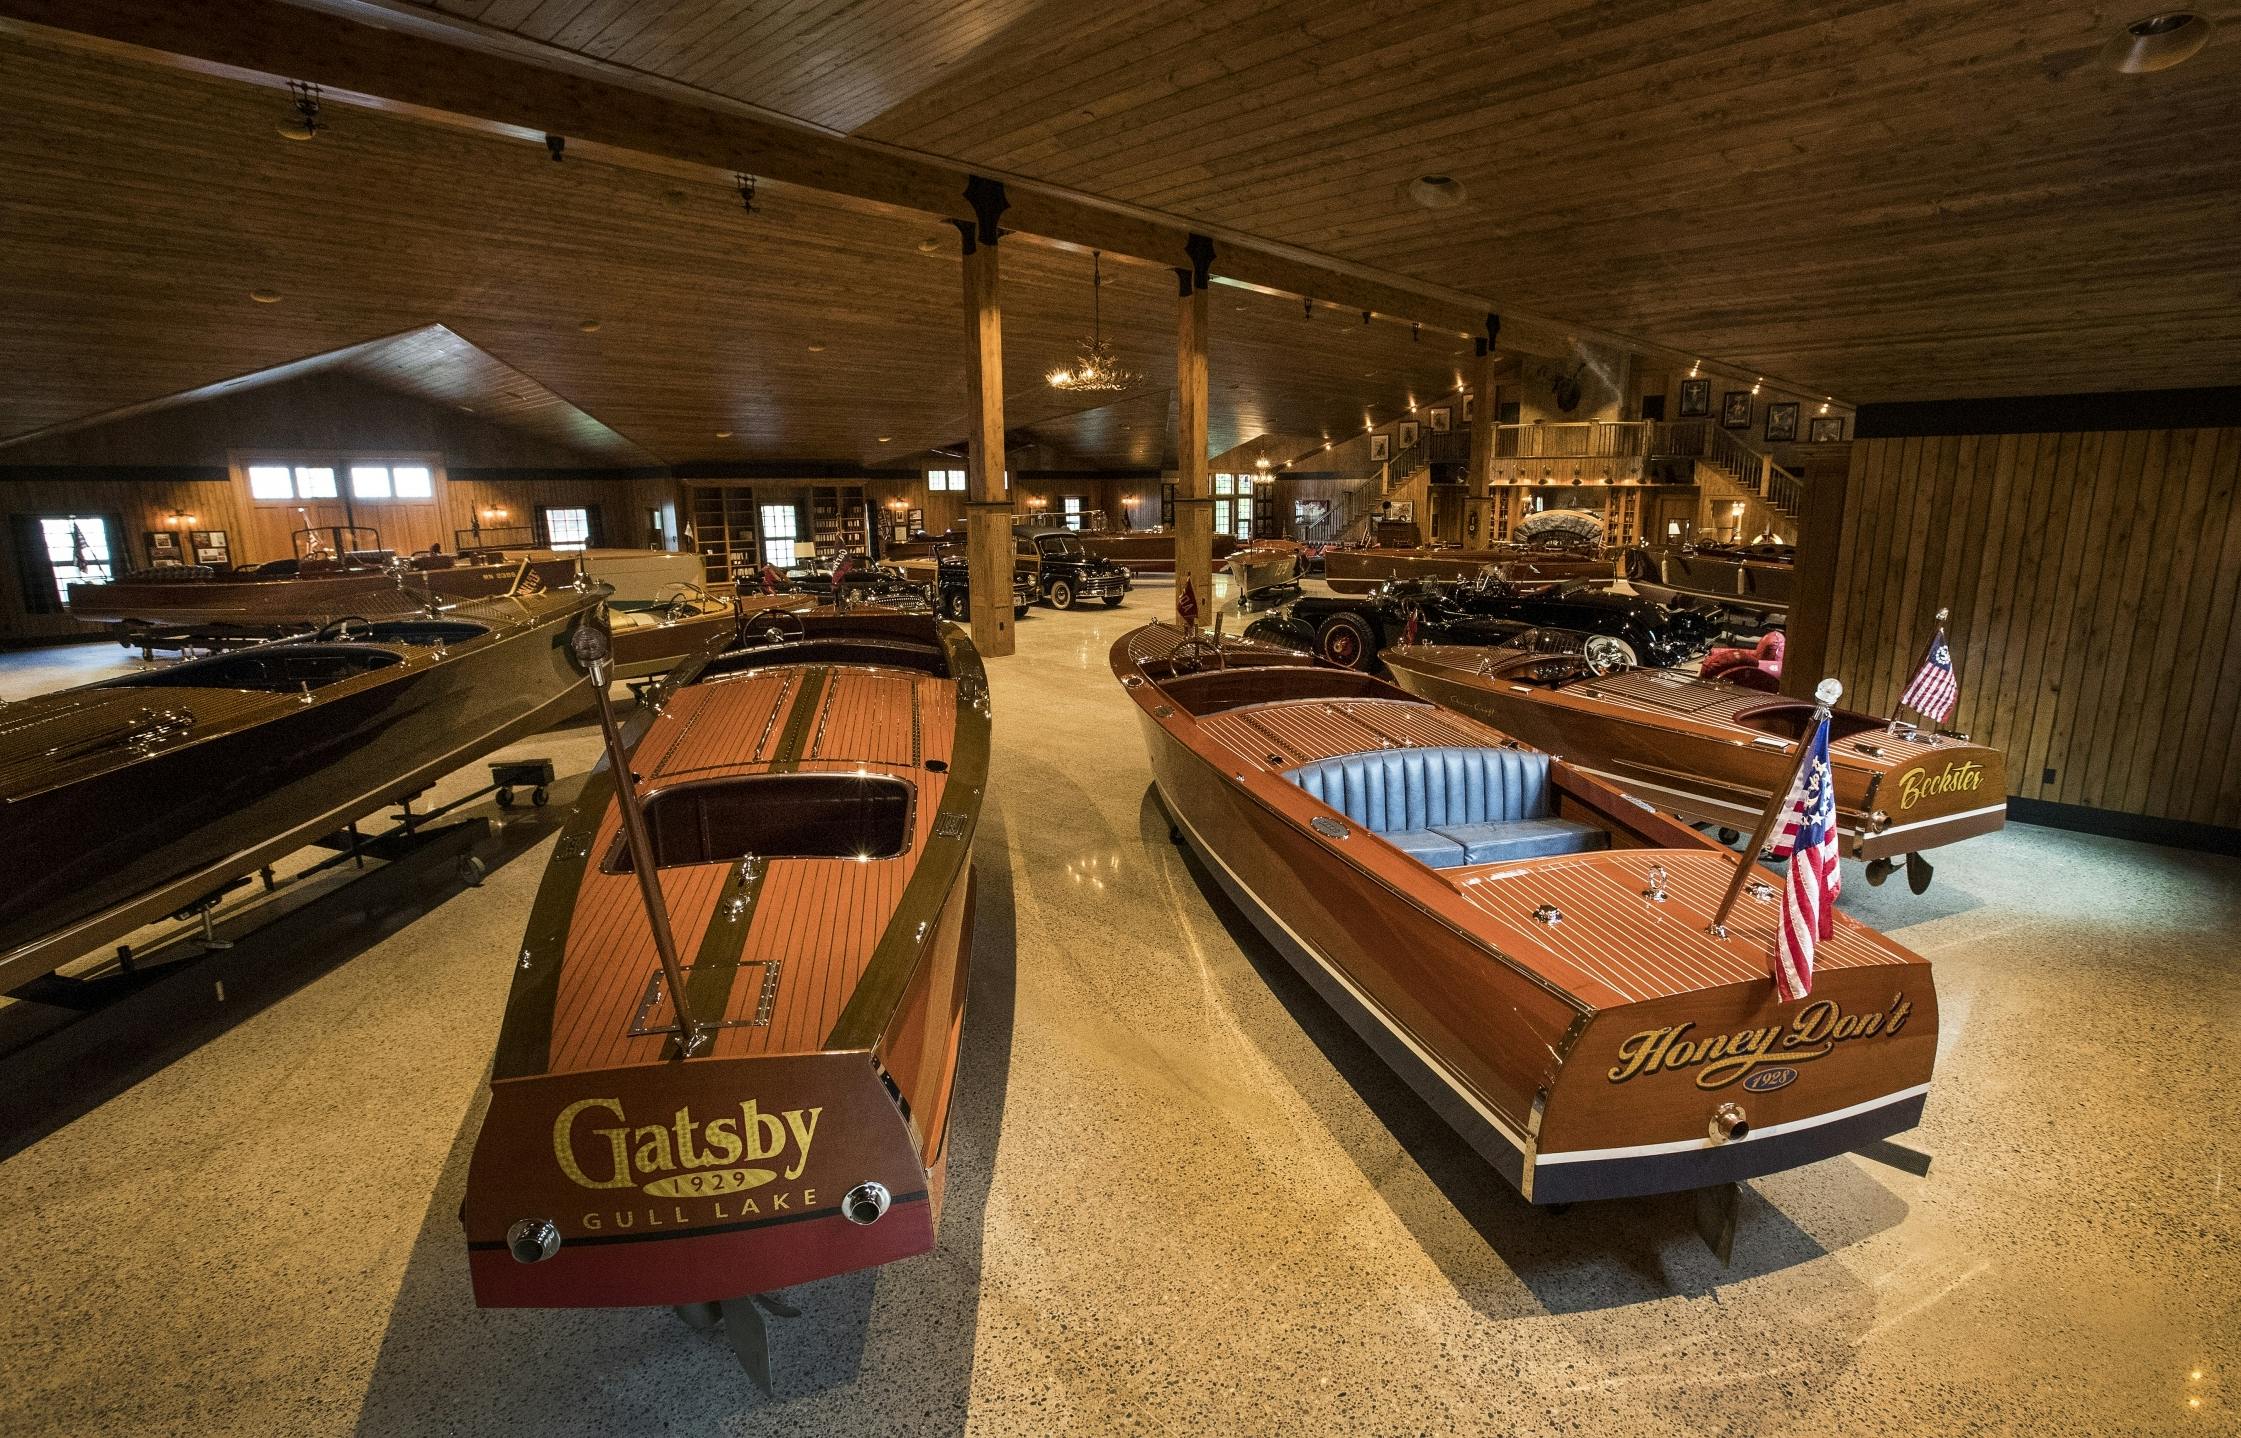 Wooden boat collections are 'whole different league